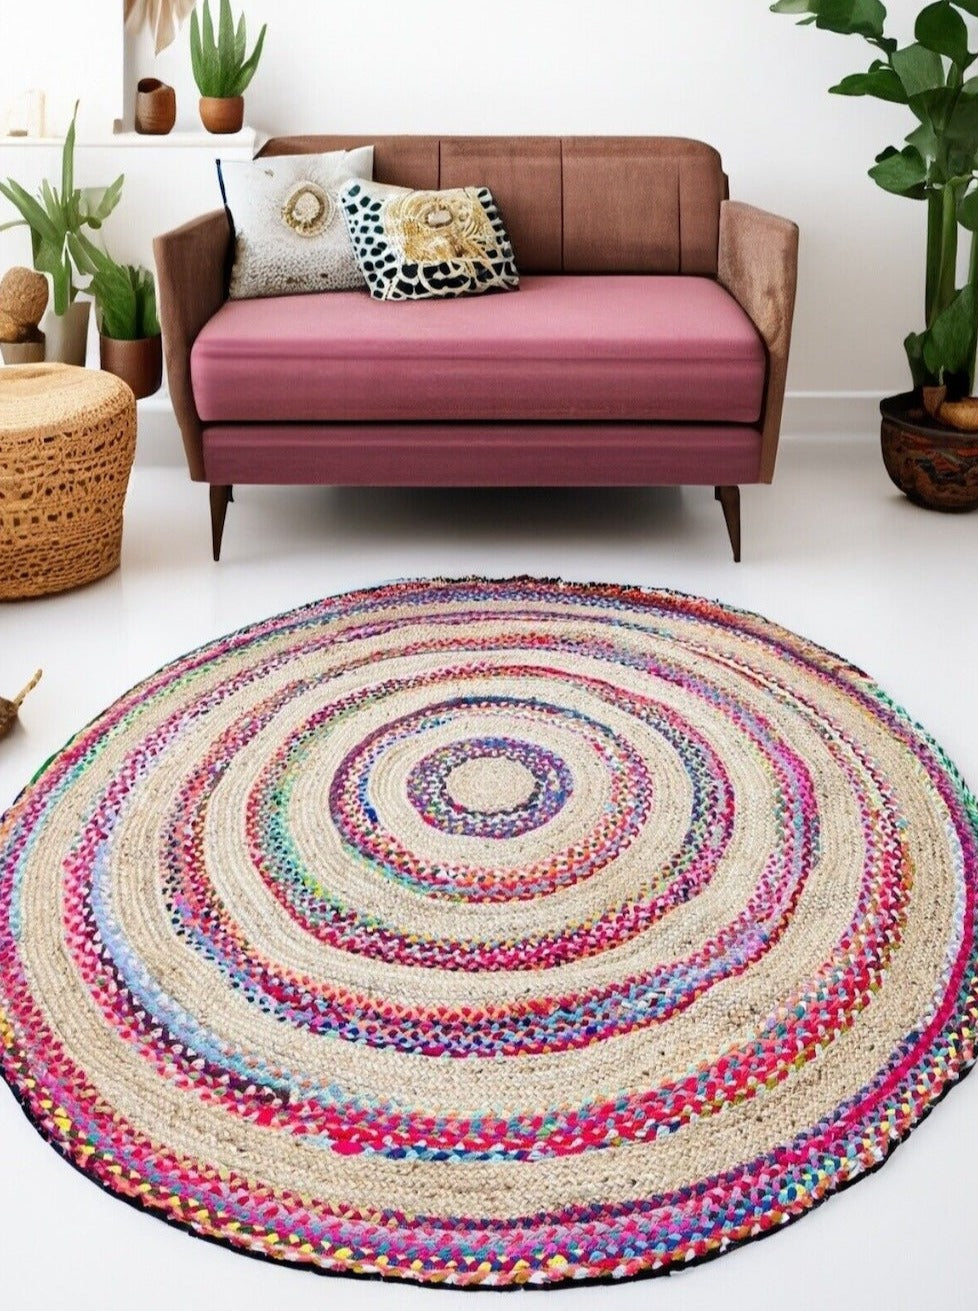 Fiesta Round Jute Recycled Fabric Rug Second Nature Online